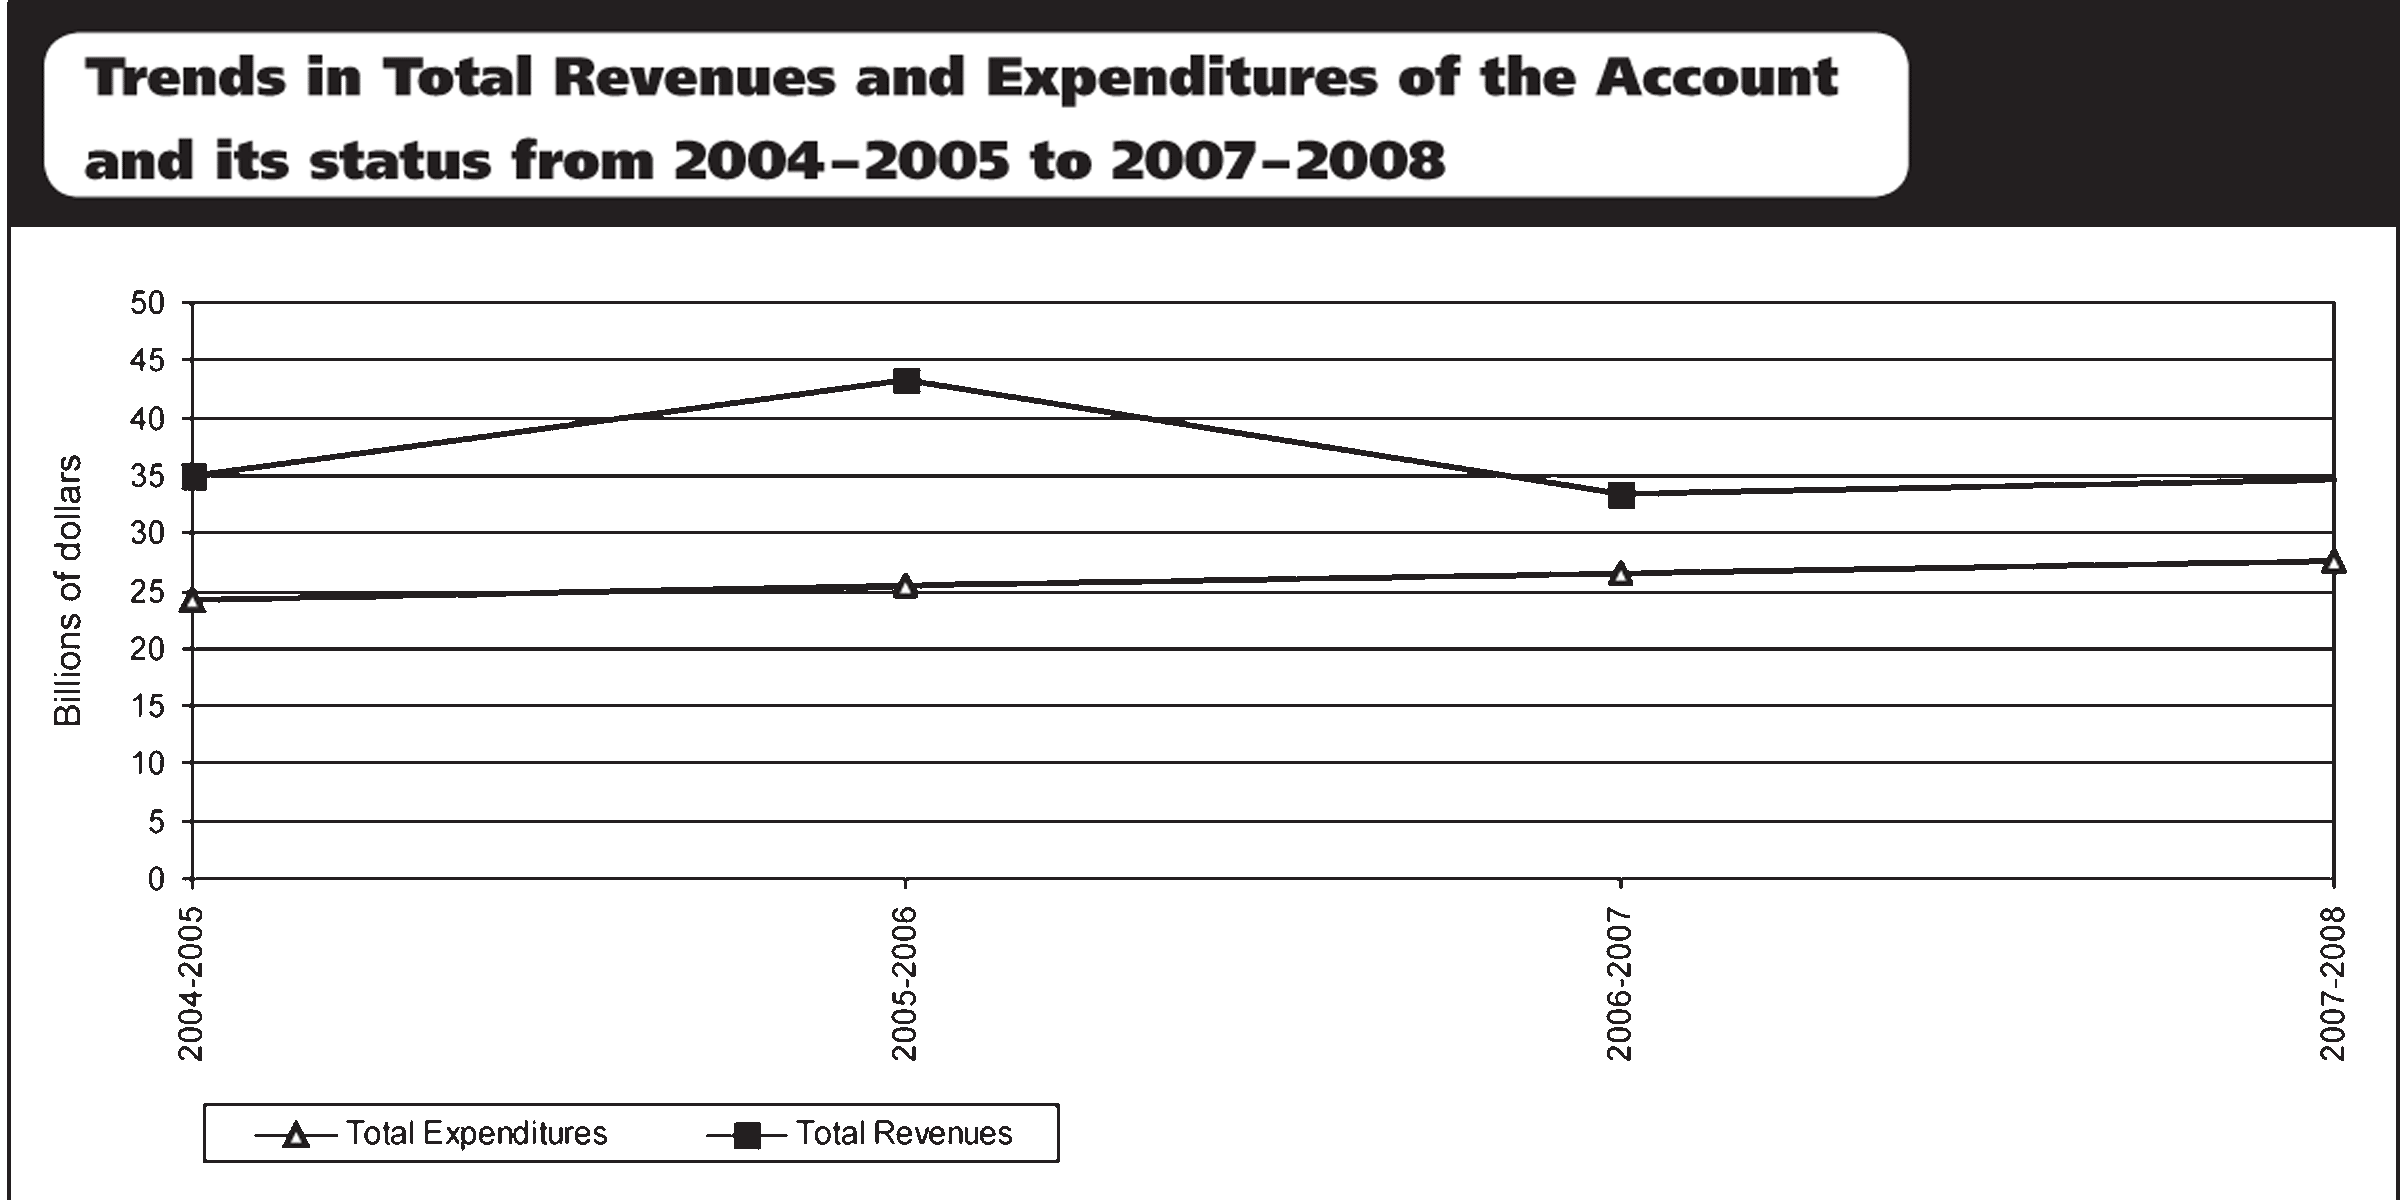 Trends in Total Revenues and Expenditures of the Account and its status from 2004 - 2005 to 2007 - 2008